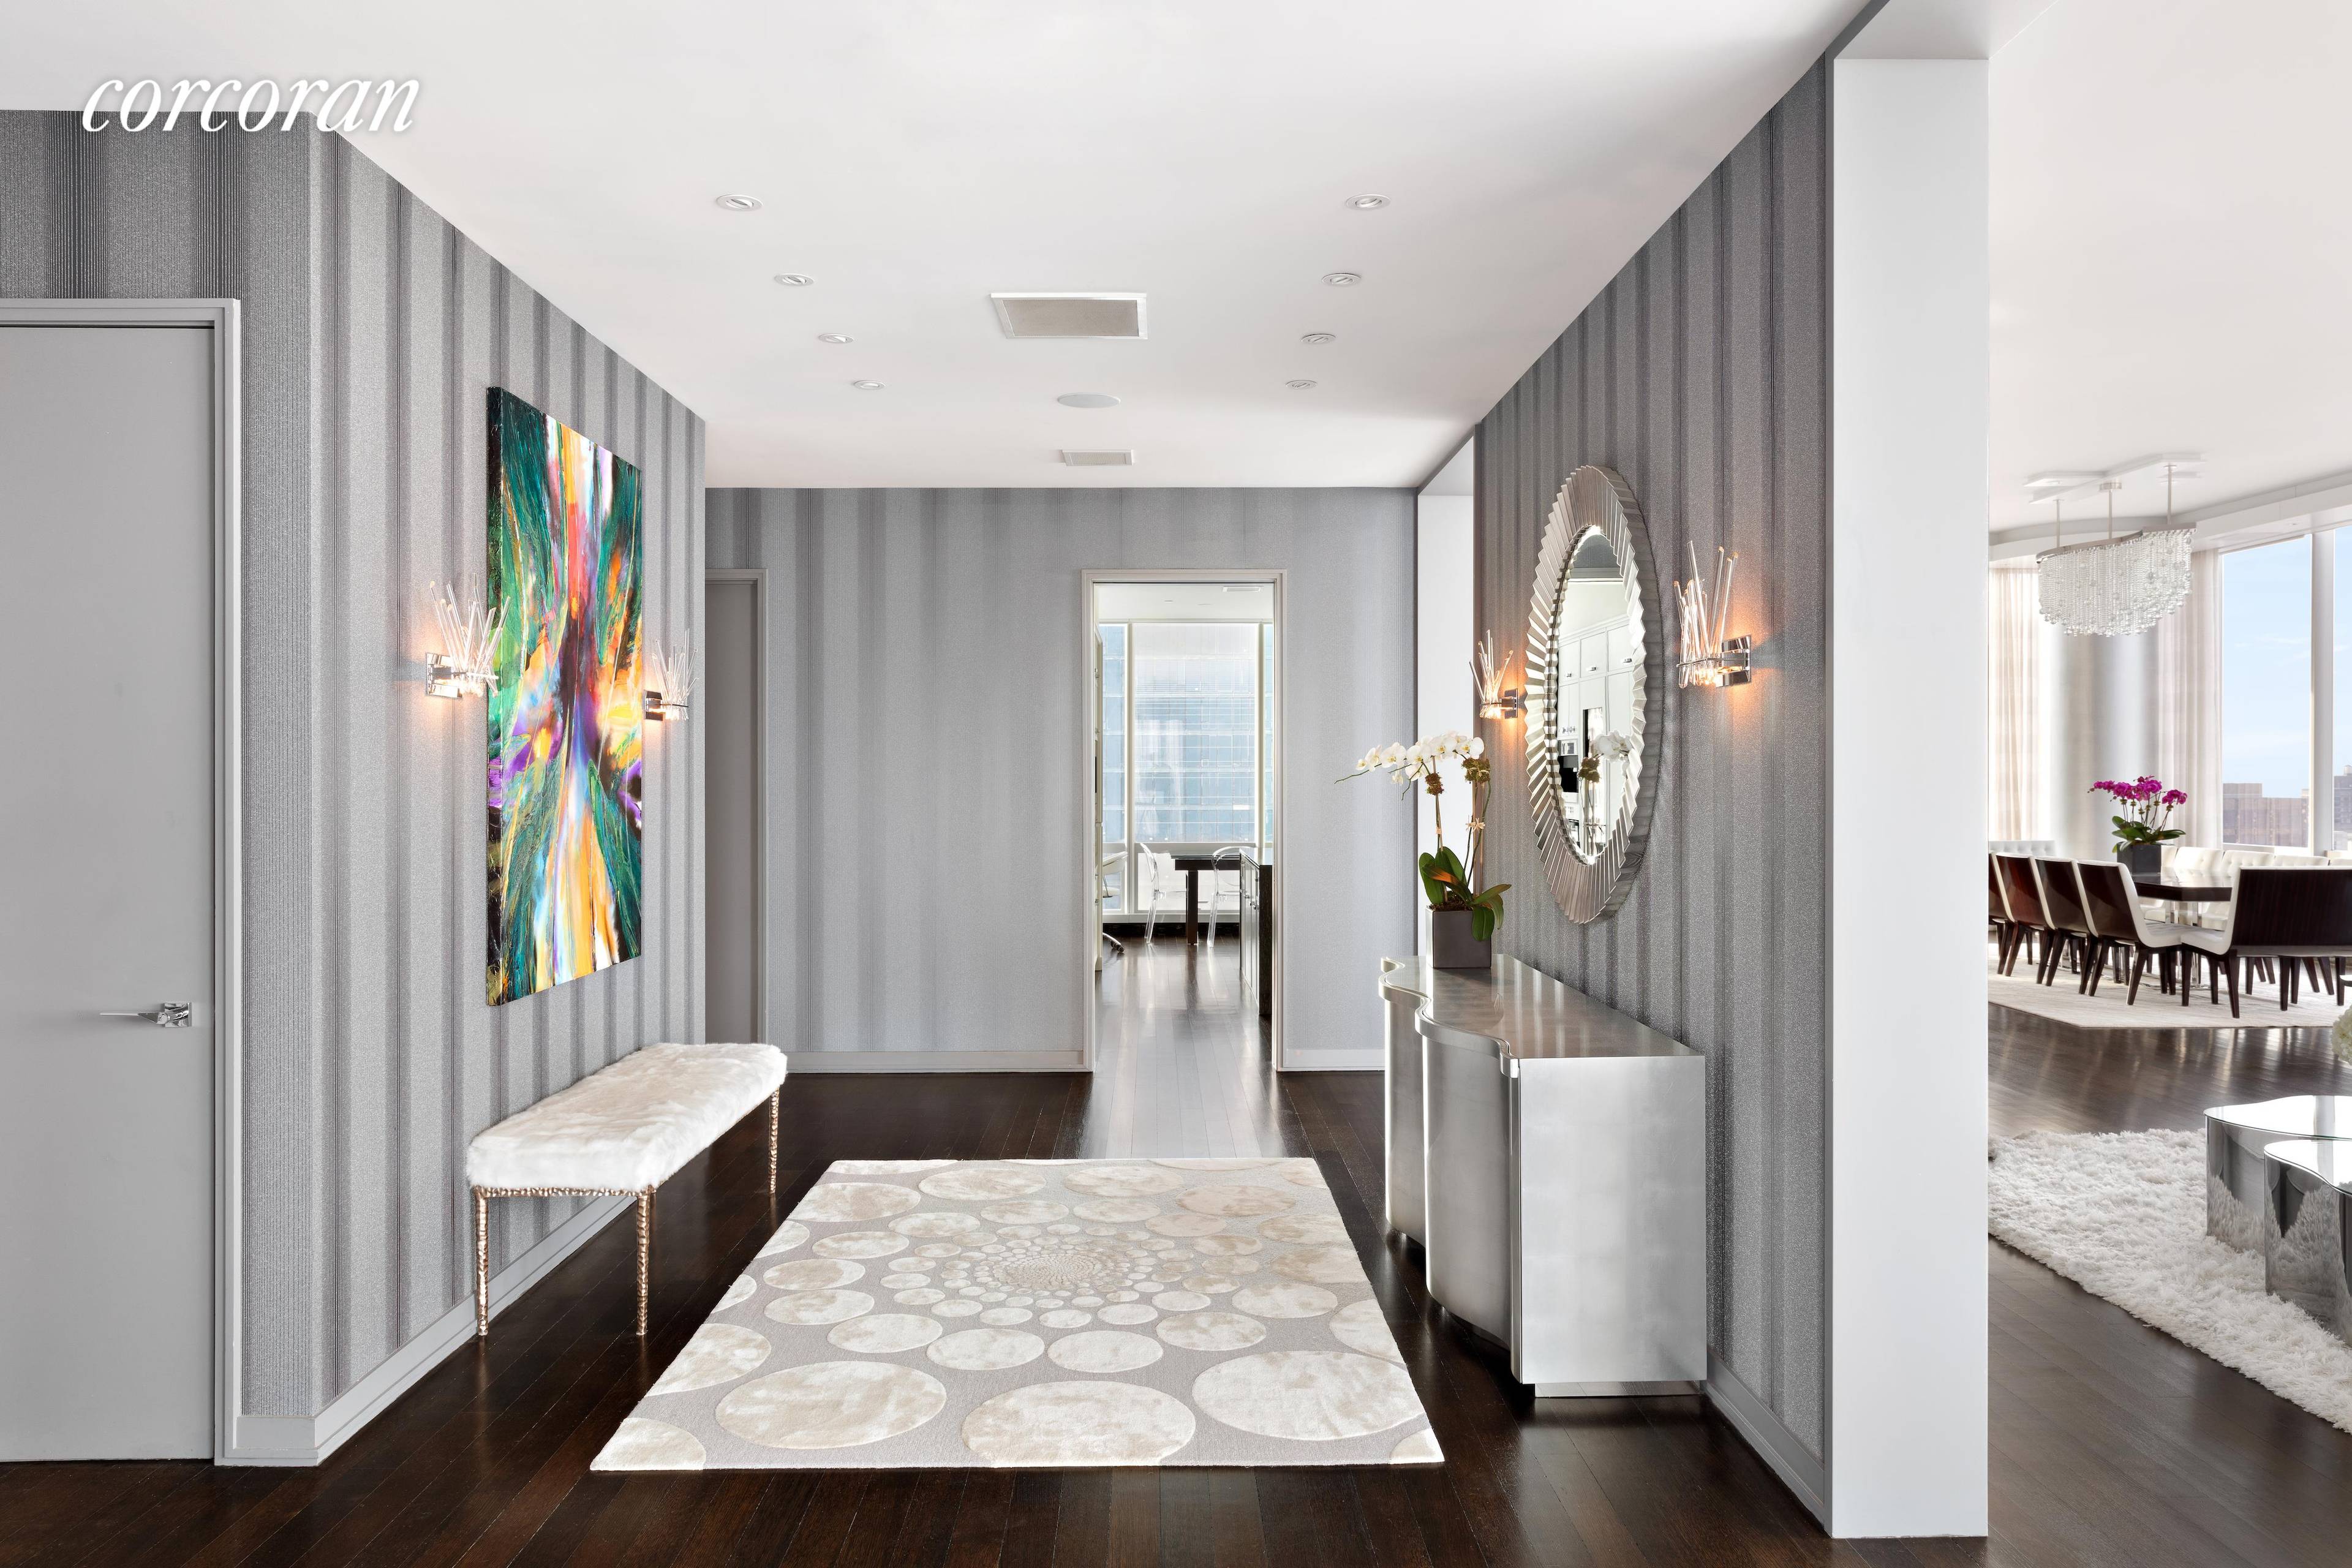 Residence 58A at One57 Spectacular Central Park Views and Modern Design Three Bedrooms Four Baths Powder Room 4, 483 sqft Furnished Rental This 58th floor A line residence at One57 ...